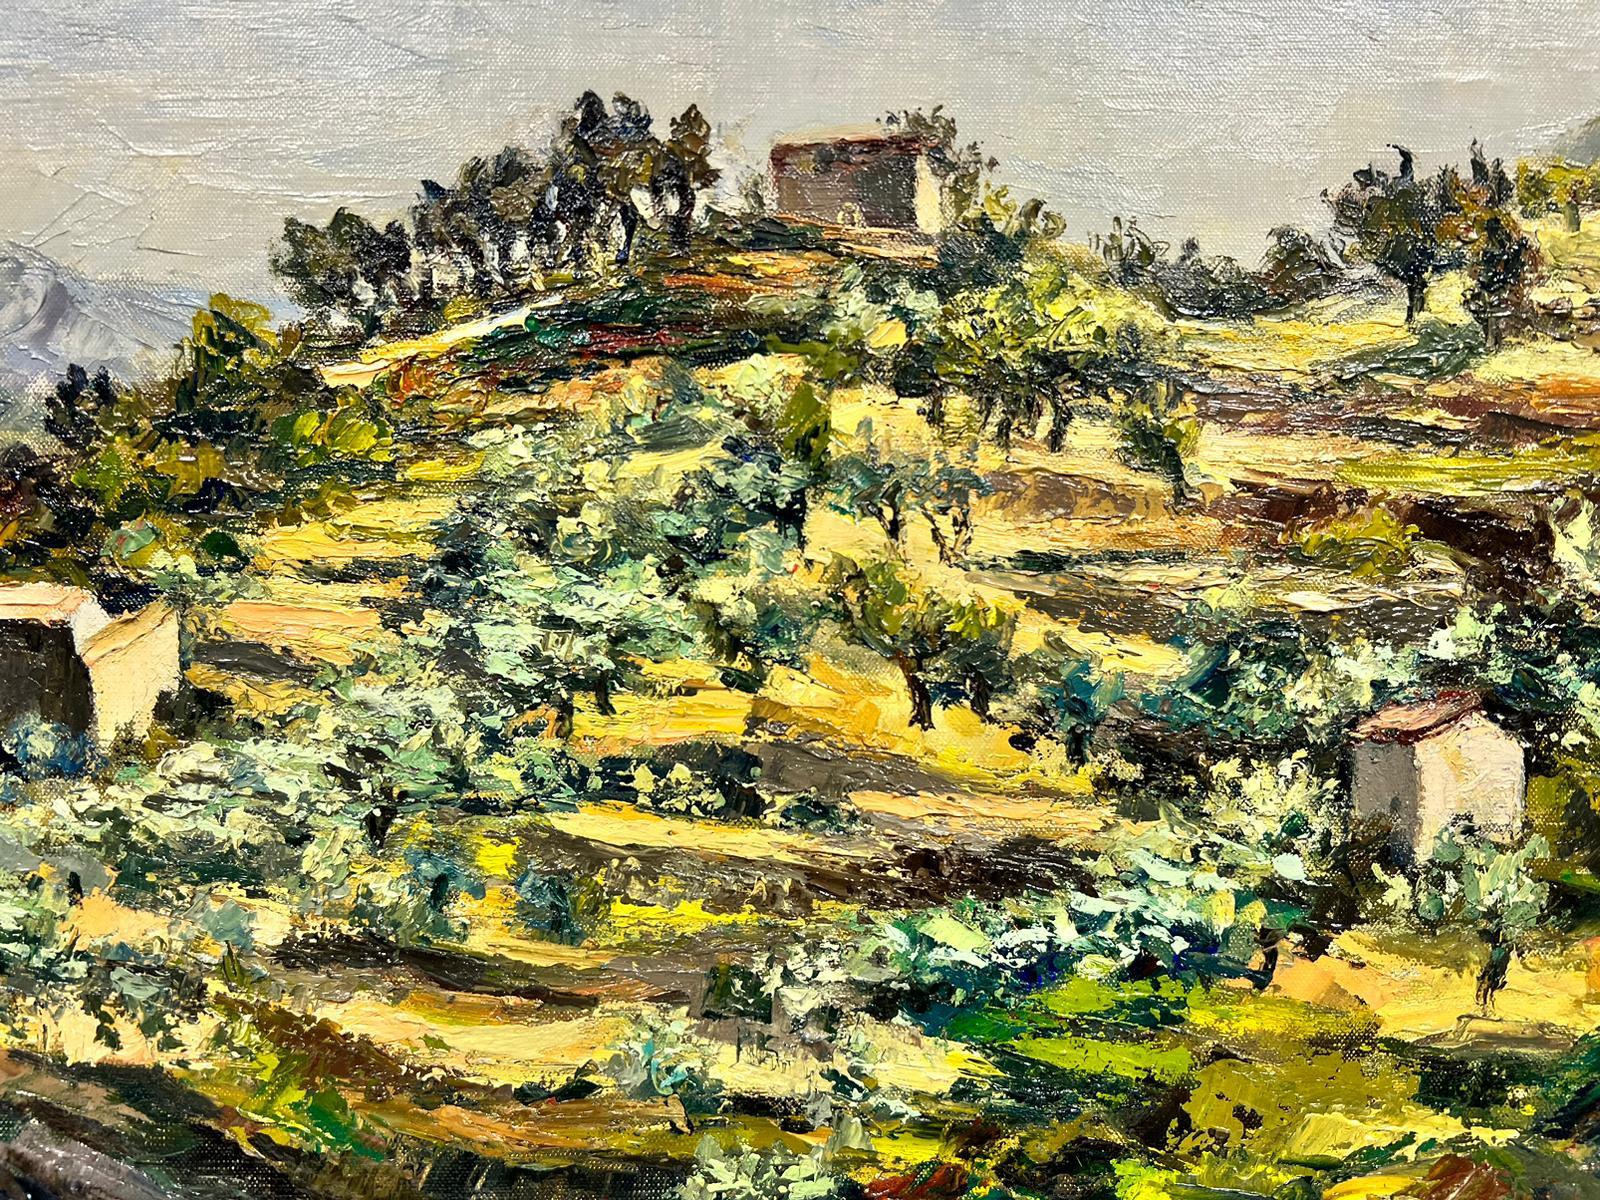 Provence Olive Groves
by Josine Vignon (French 1922-2022)
signed on front and back
oil painting on canvas, unframed

canvas: 13 x 18 inches

Colors: Green colors, black, brown, beige, grey and blue

Very good condition

Provenance: from the artists